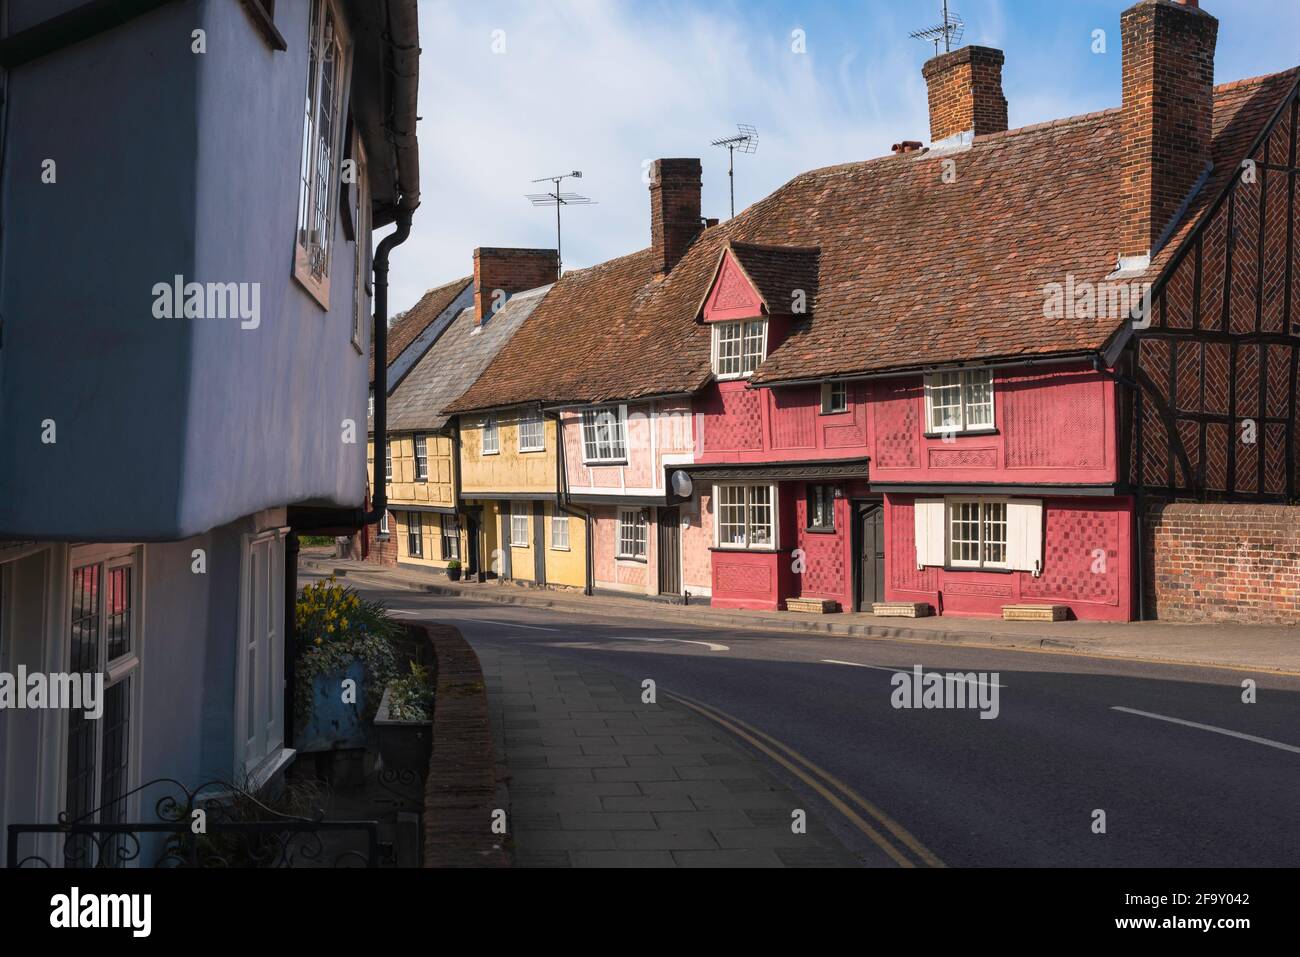 Saffron Walden England, view of typically colourful late medieval houses in Bridge Street in the Essex town of Saffron Walden, UK. Stock Photo